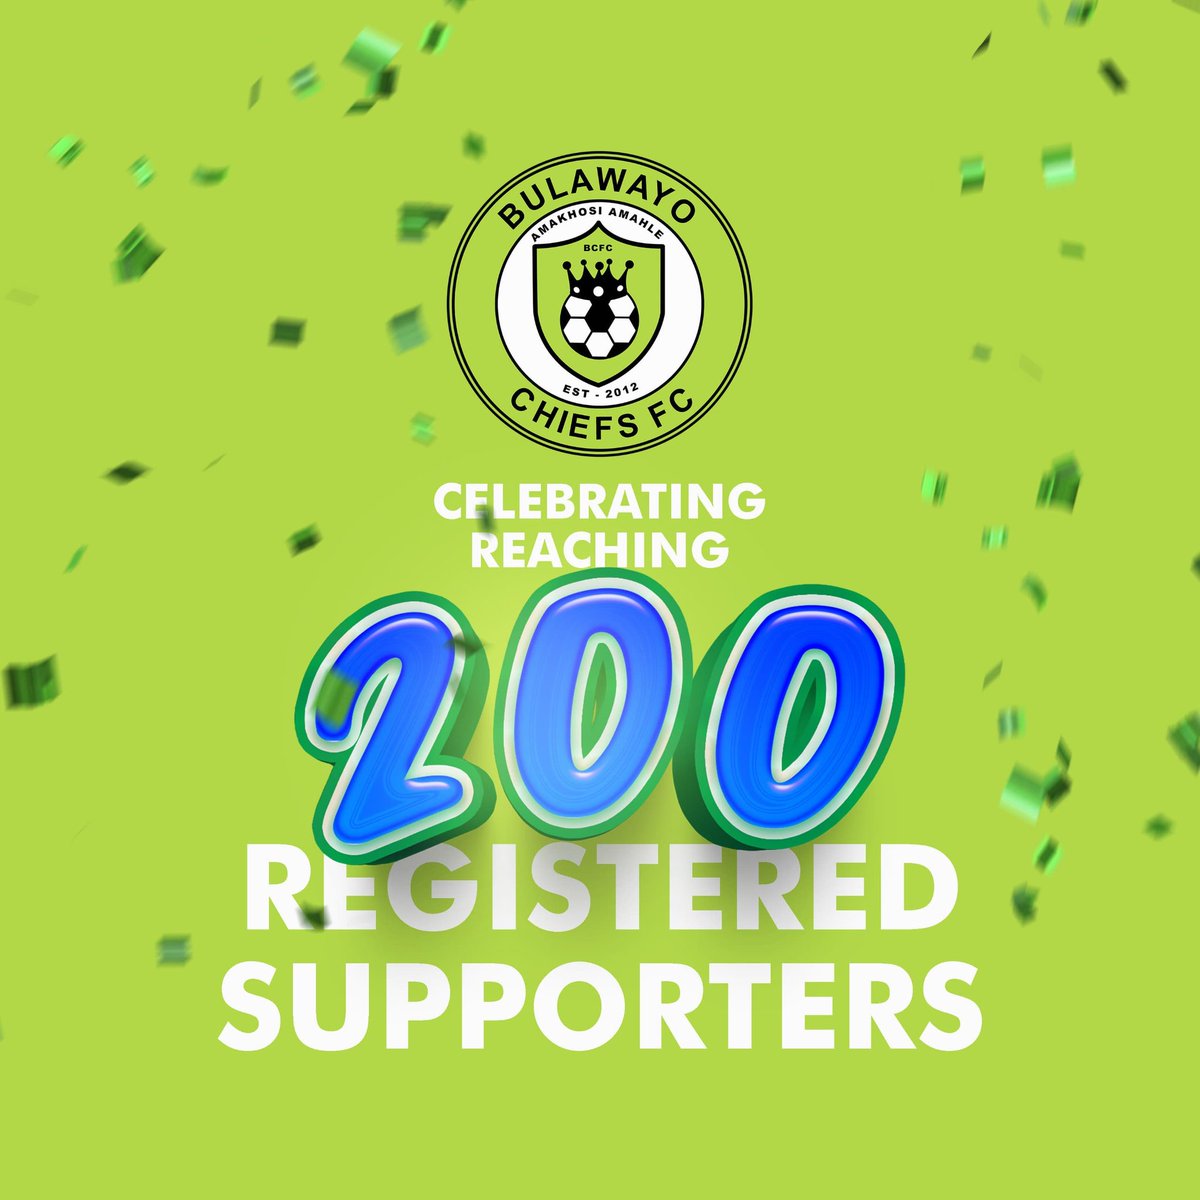 🚨Bulawayo Chiefs Supporters Celebrating 200 fully registered, traceable Members of the BYO SUPPORTERS CHAPTER A journey of 7 Million starts with 200. THANK YOU MaNINJA ✌️✌️ #GrowingTheFanBase